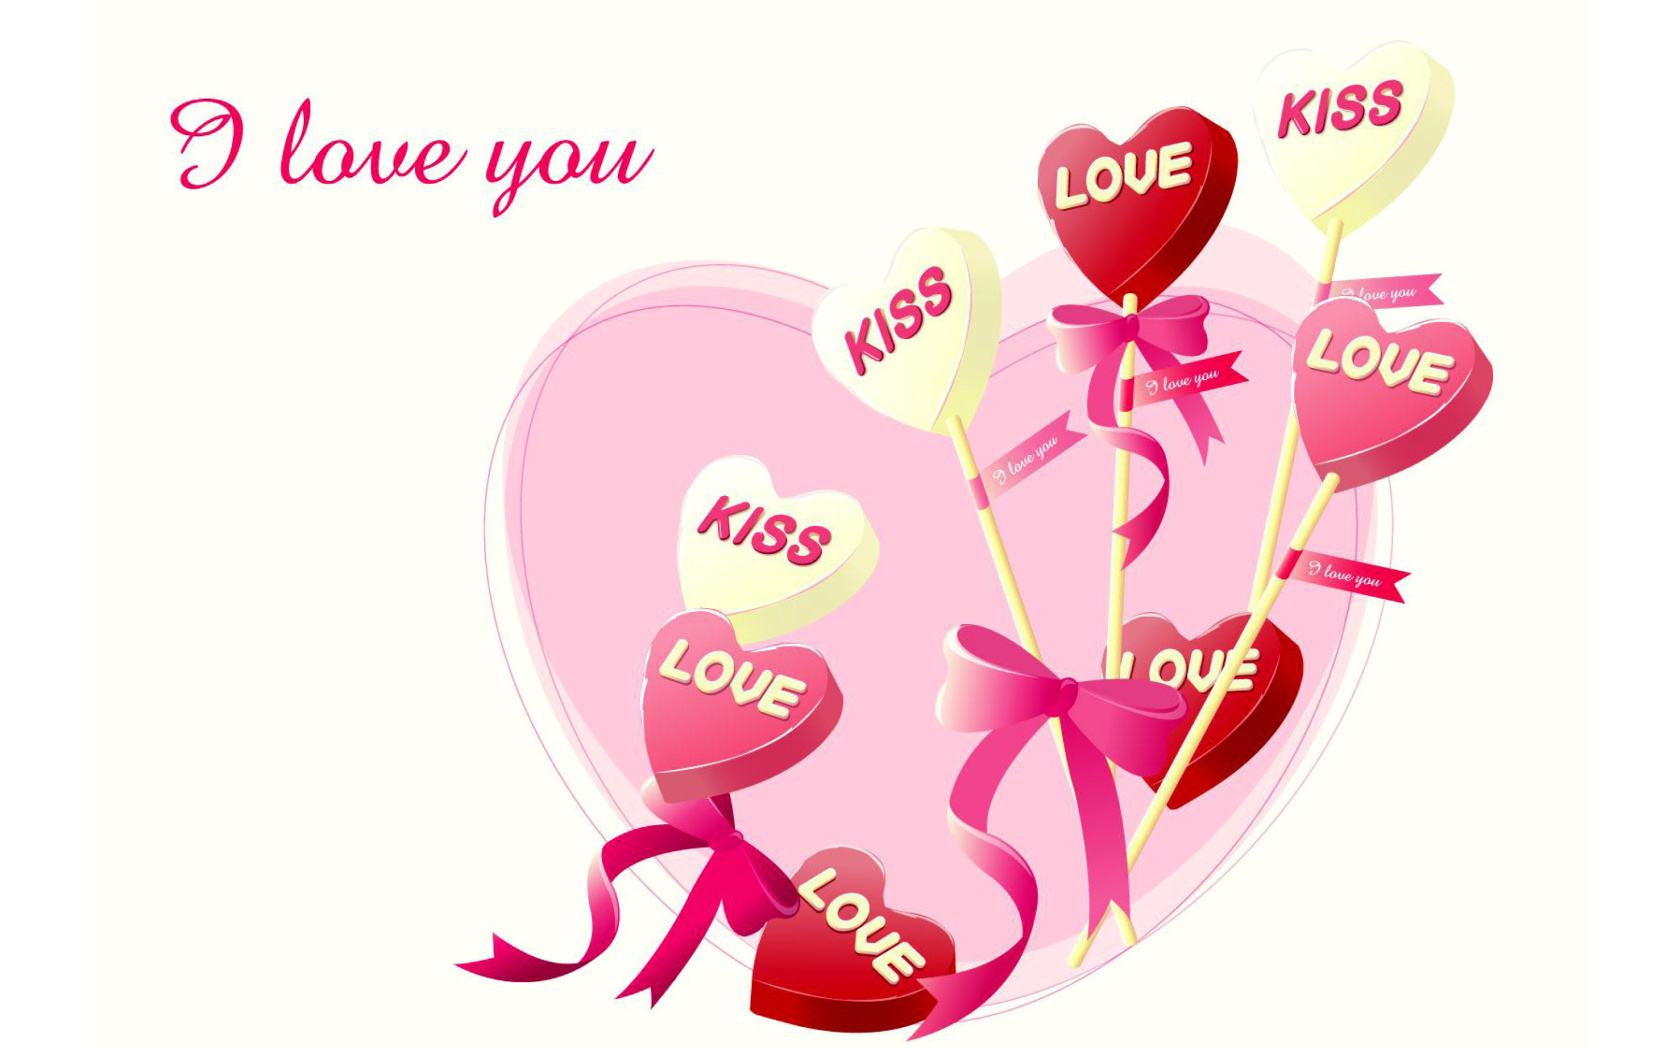 I Love You Balloons and Hearts wallpaper 1680x1050